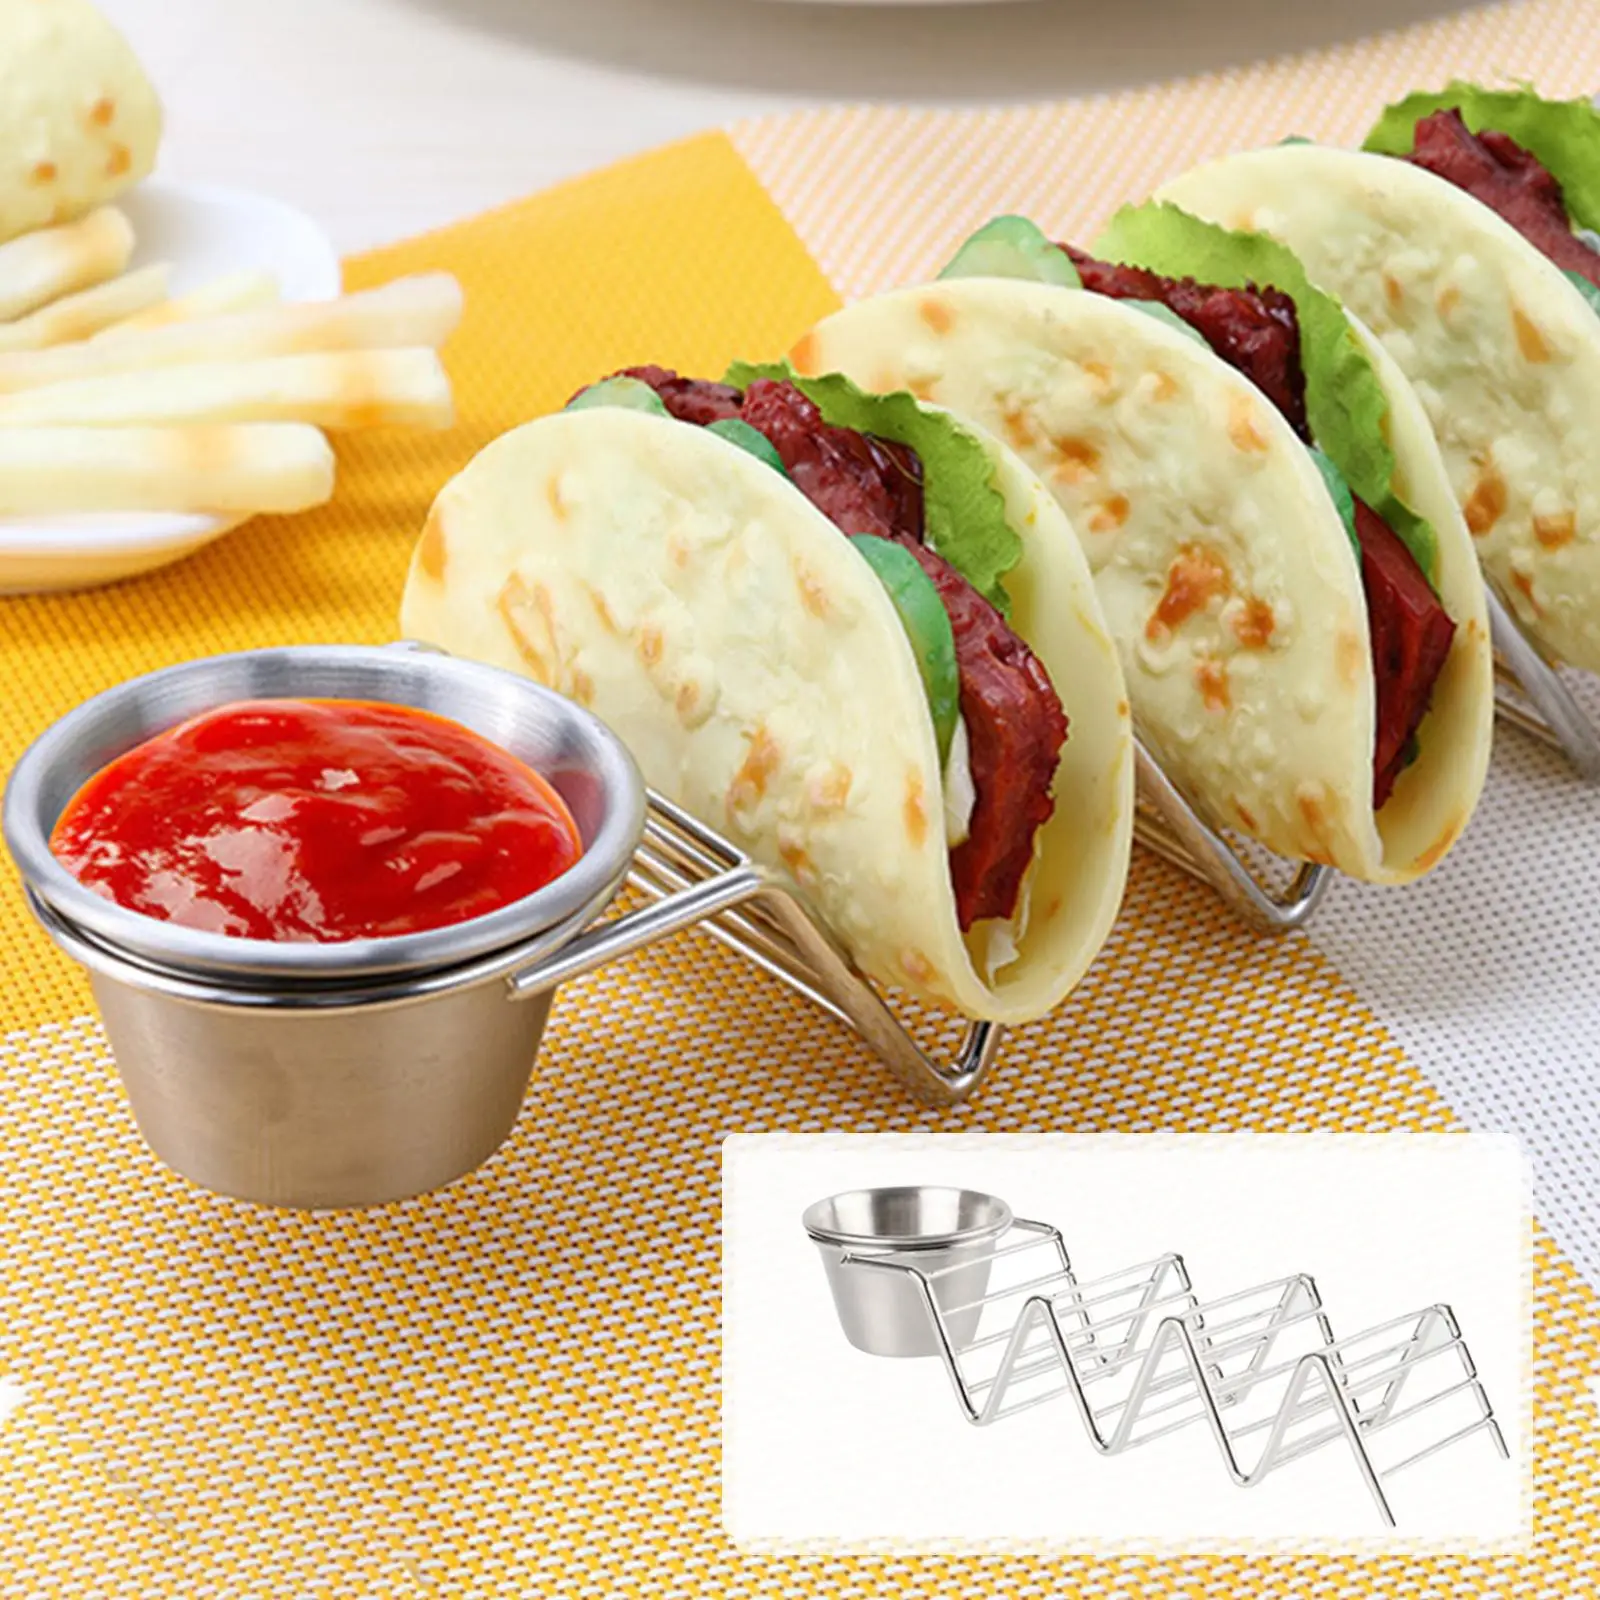 Stainless Steel Taco Holder Hot Dog Holder Plate for Tortillas Mexican Food